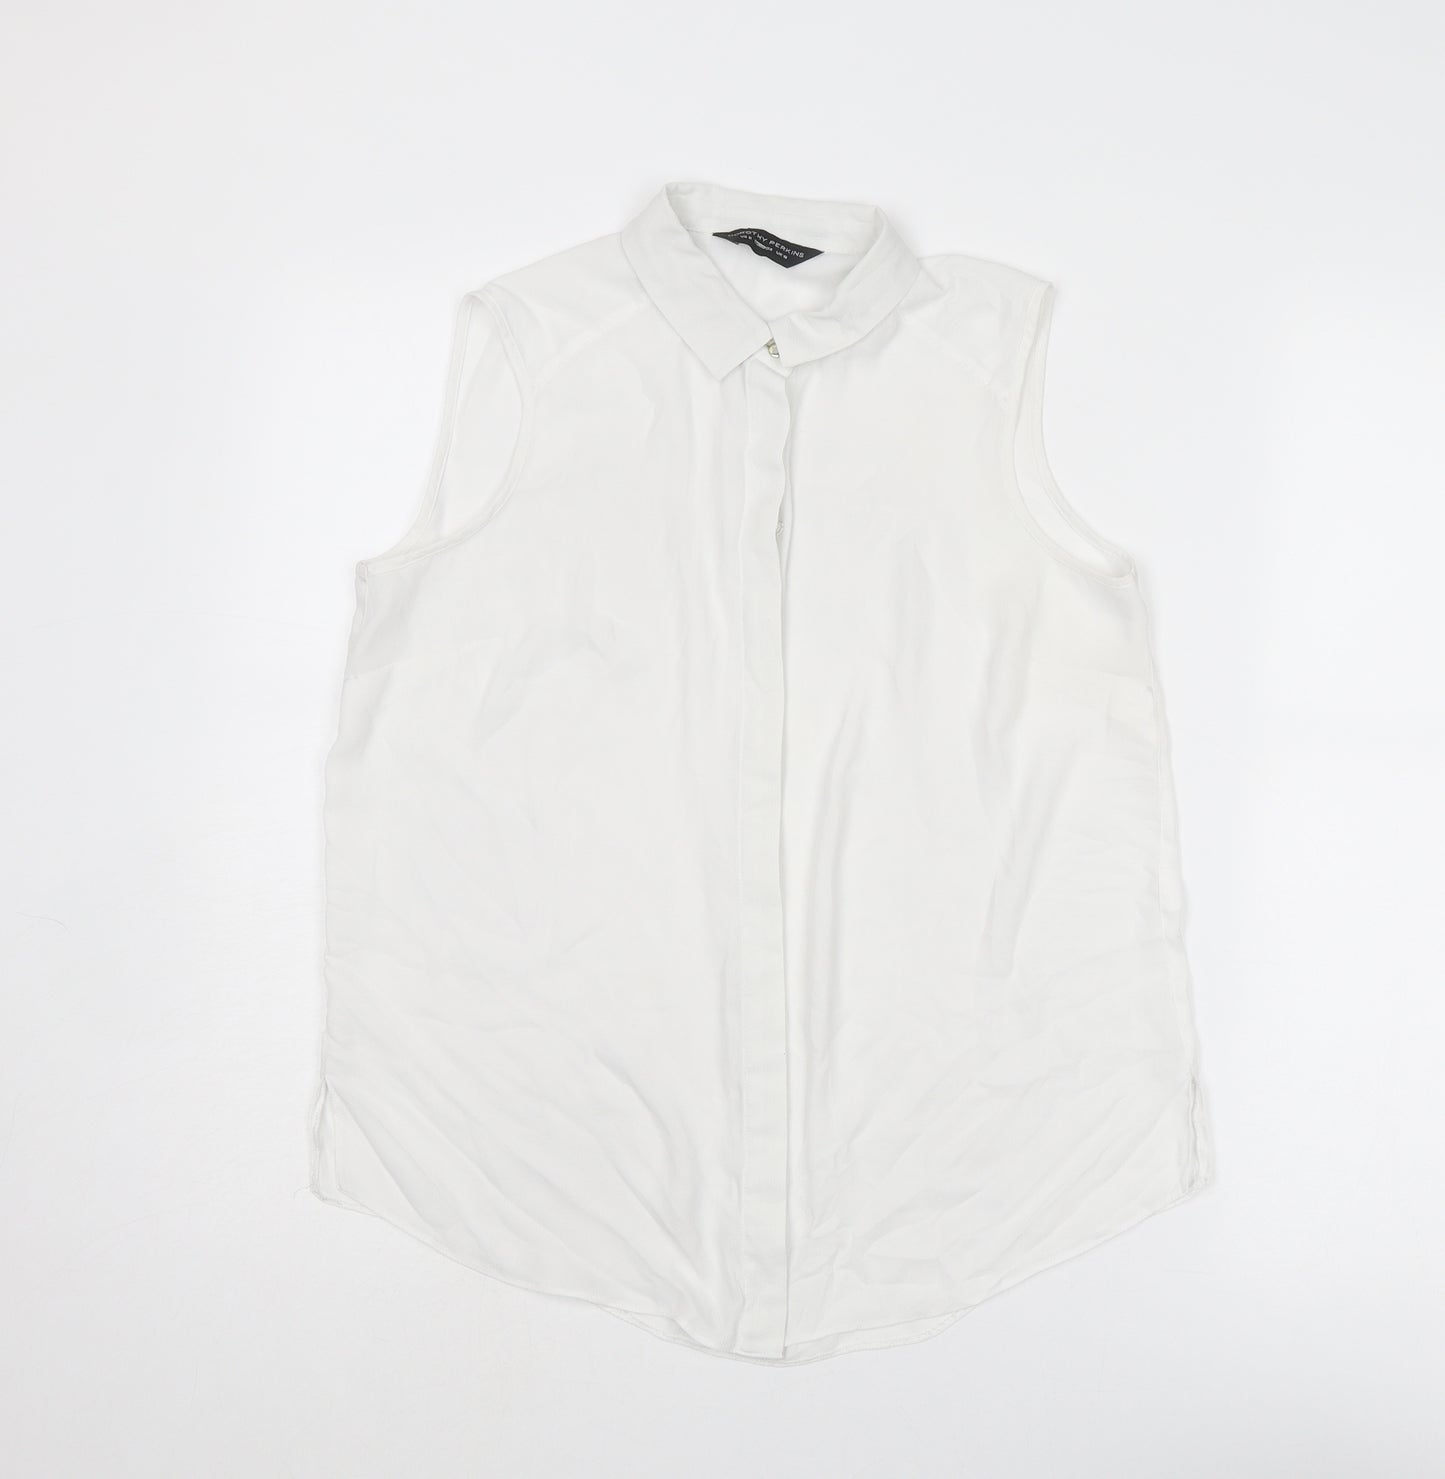 Dorothy Perkins Womens White Polyester Basic Tank Size 10 Collared